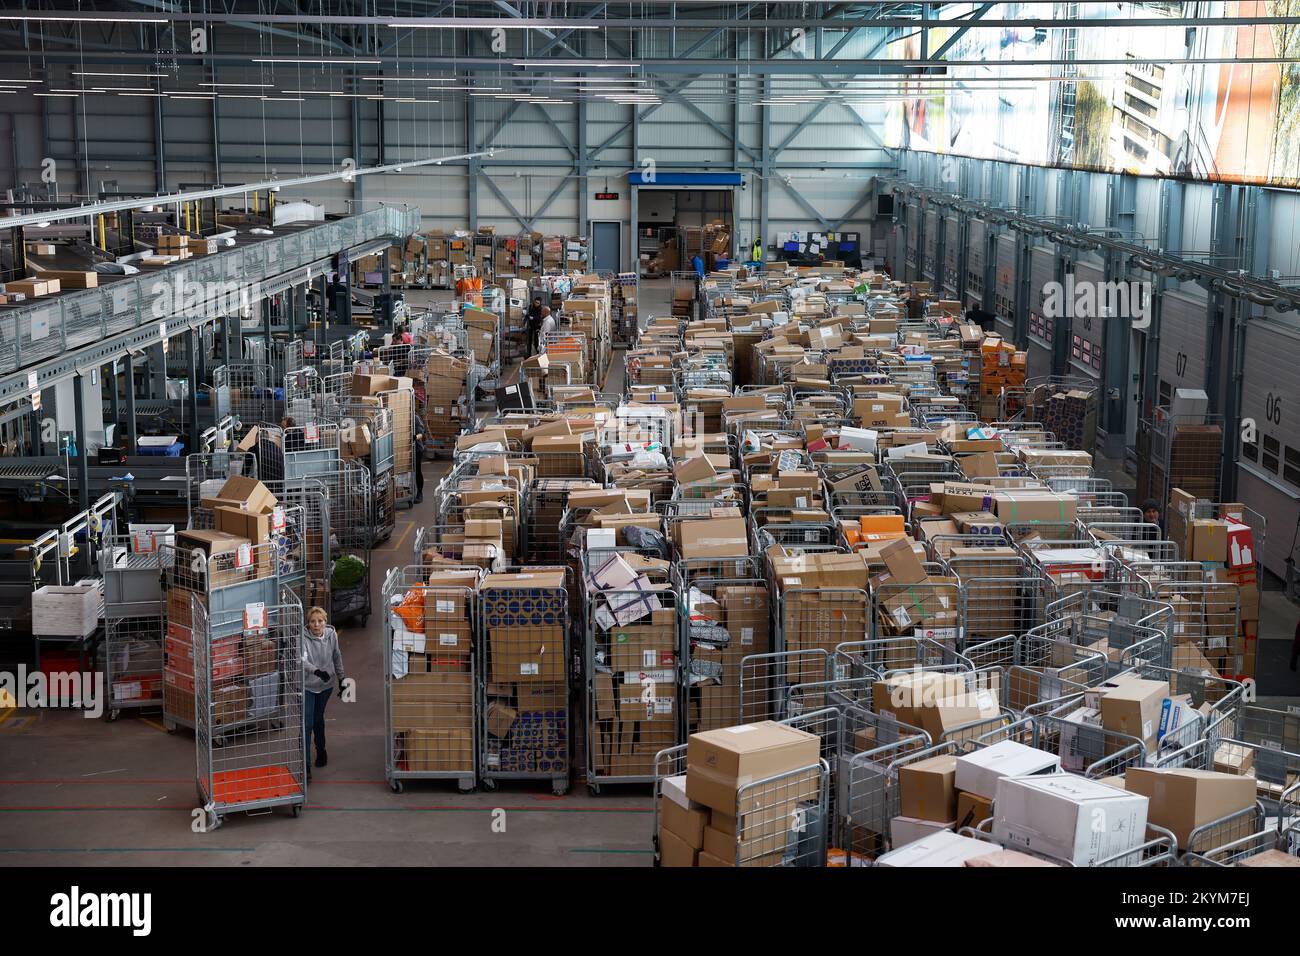 WESTZAAN - Employees of post and parcel delivery company PostNL sort  parcels in the parcel sorting centre. This is one of the busiest times of  the year leading up to Christmas. ANP